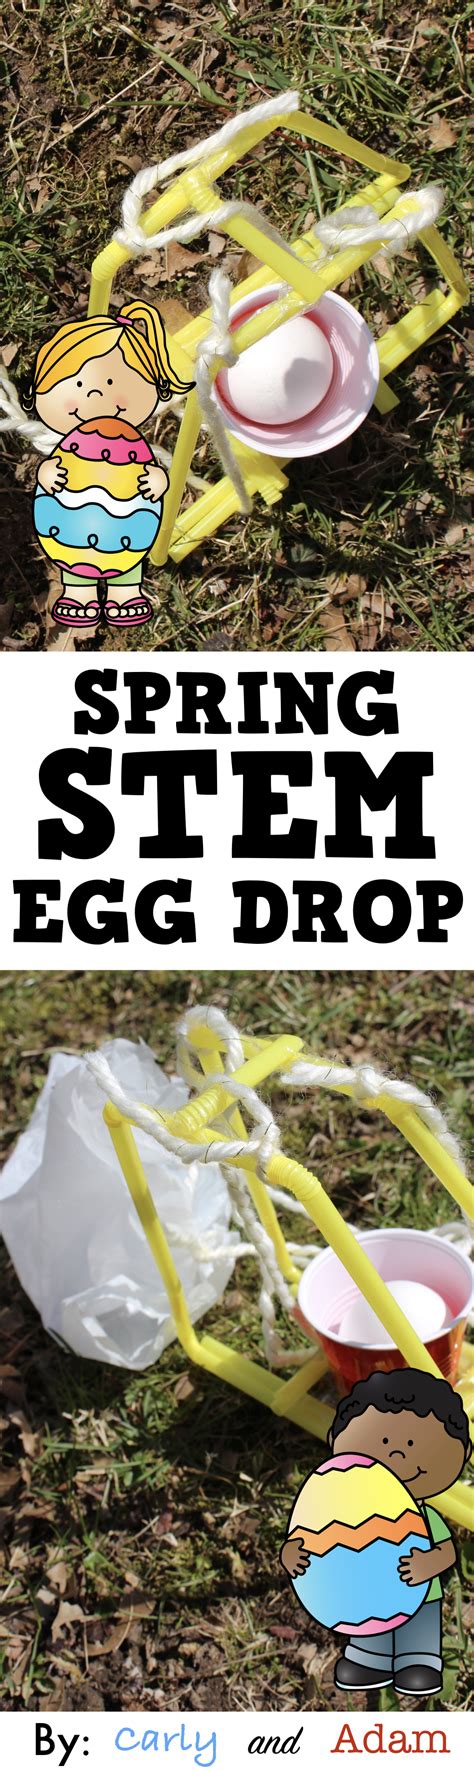 spring stem egg drop can you design and build a device to protect an egg from breaking or